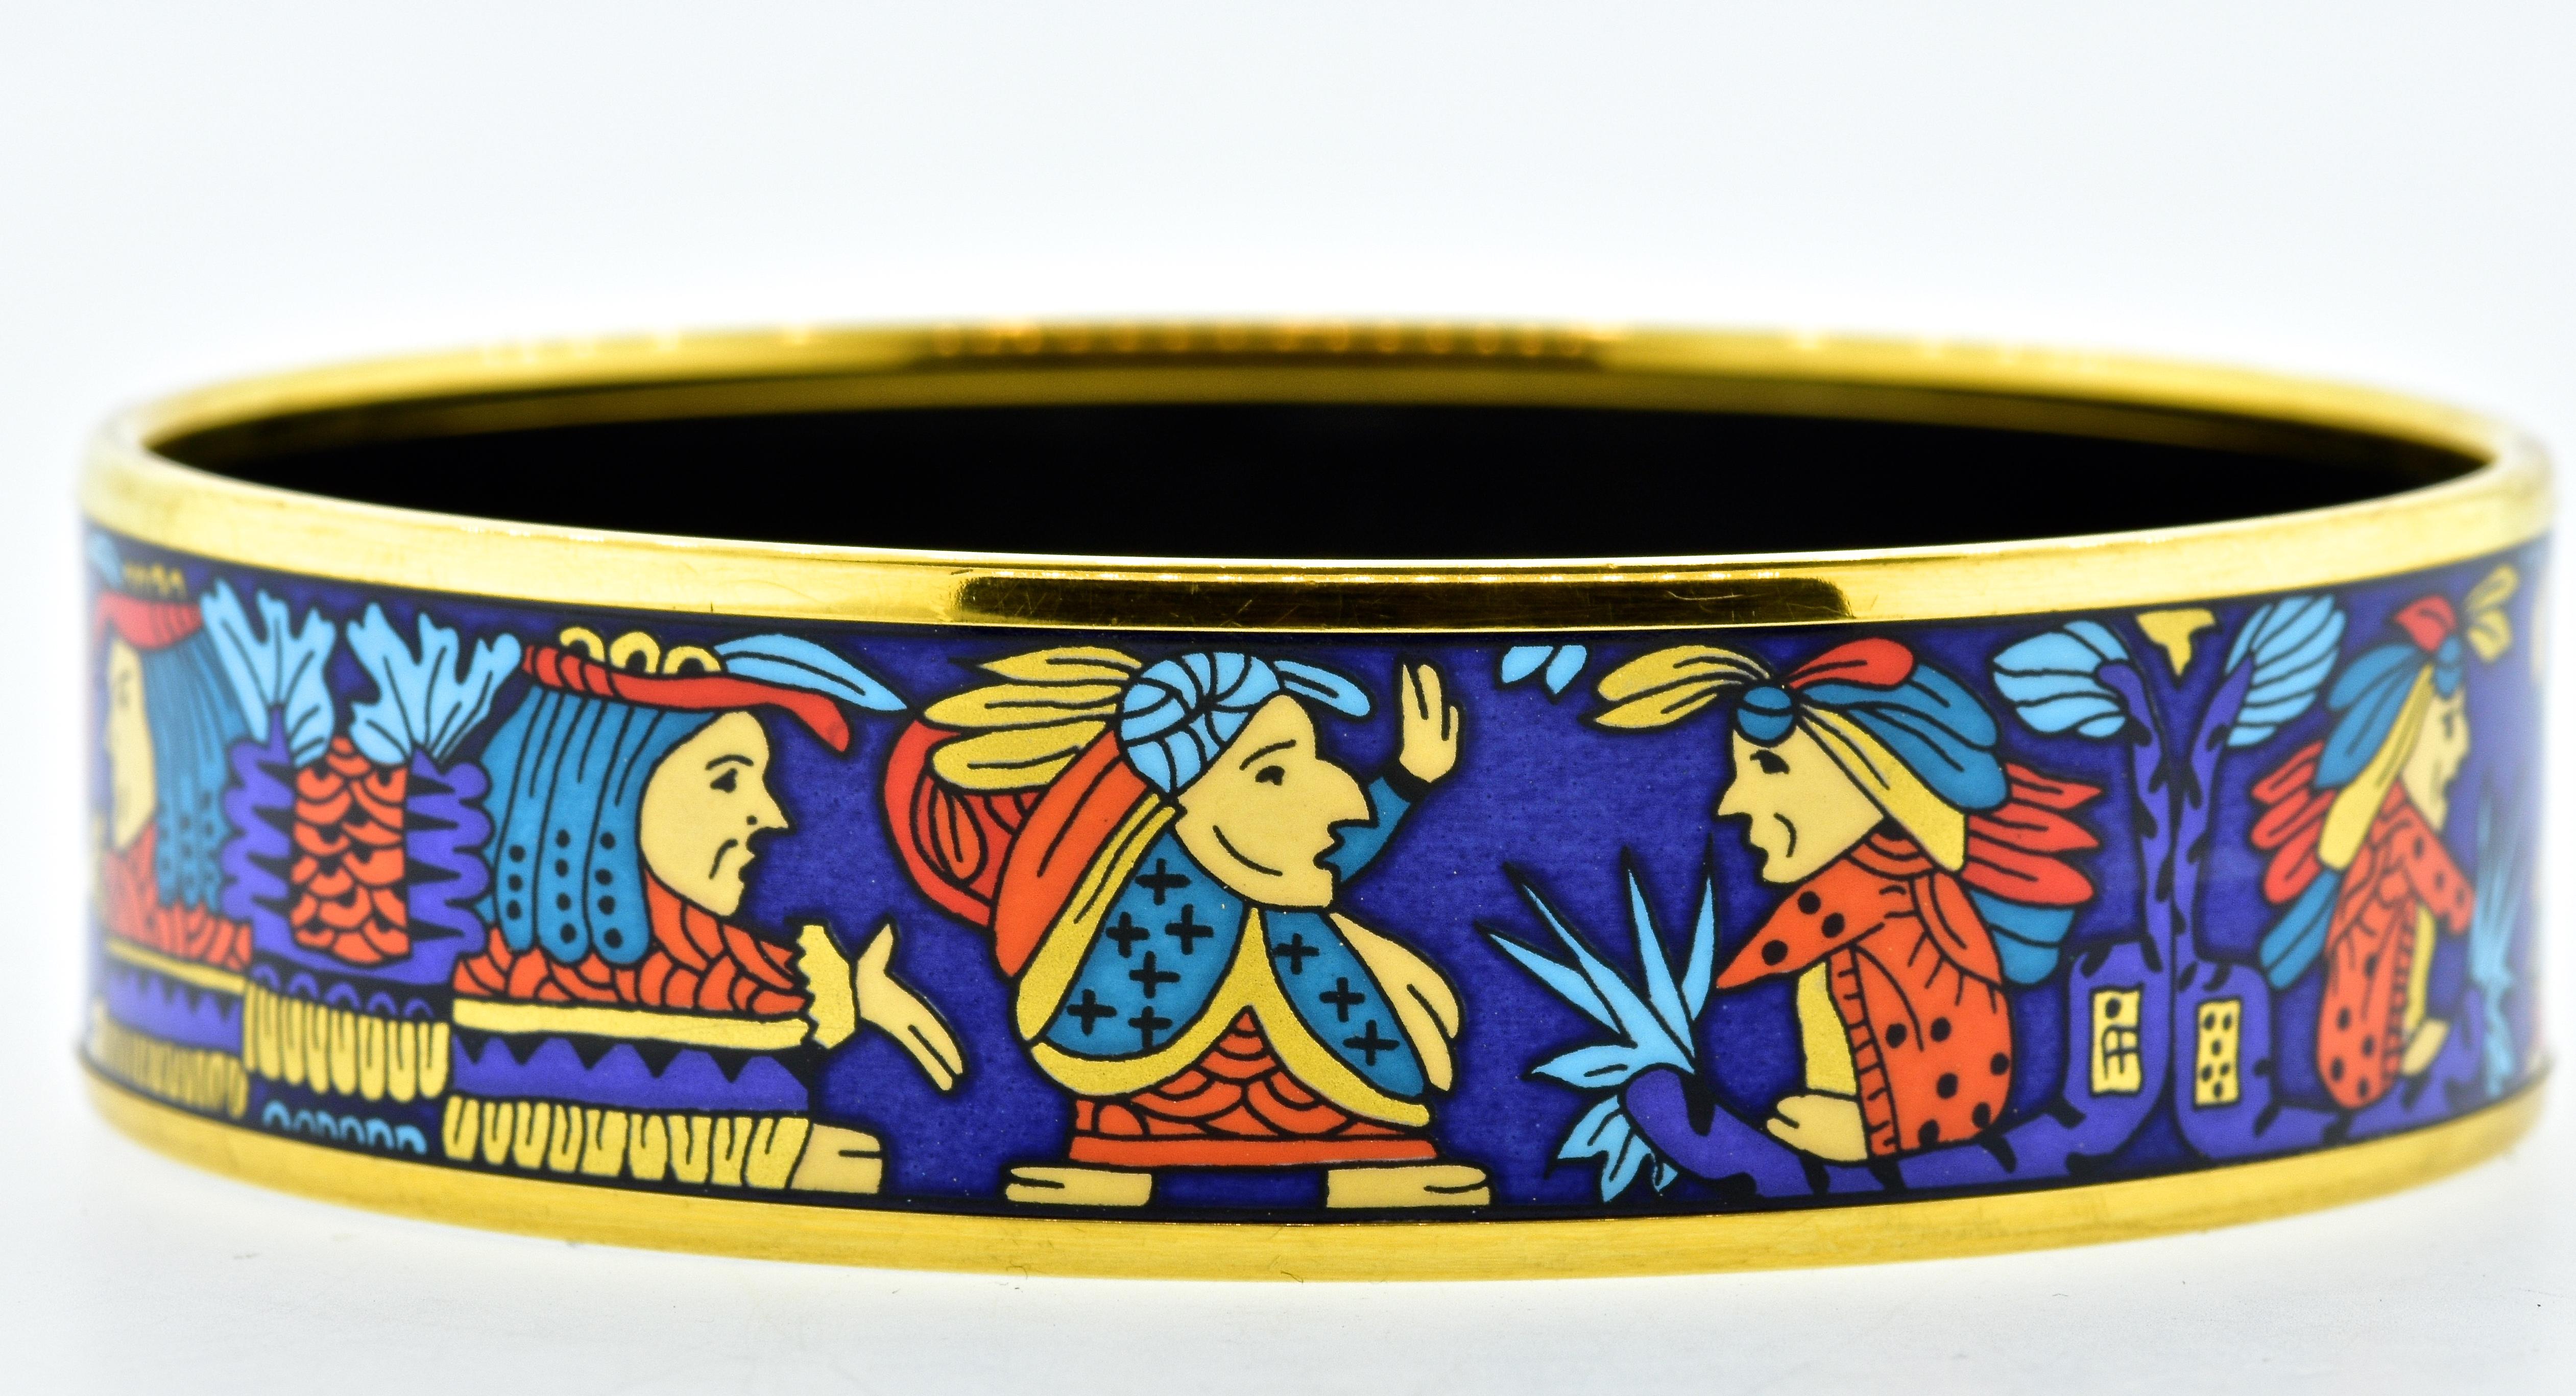 Hermes Paris enamel bangle bracelet, size large.  Multi color enamel, this wide statement is .75 inches wide and had an interior diameter of 2.75 inches which is medium to wide wrist.  This vintage Hermes Paris piece is in excellent condition.  It